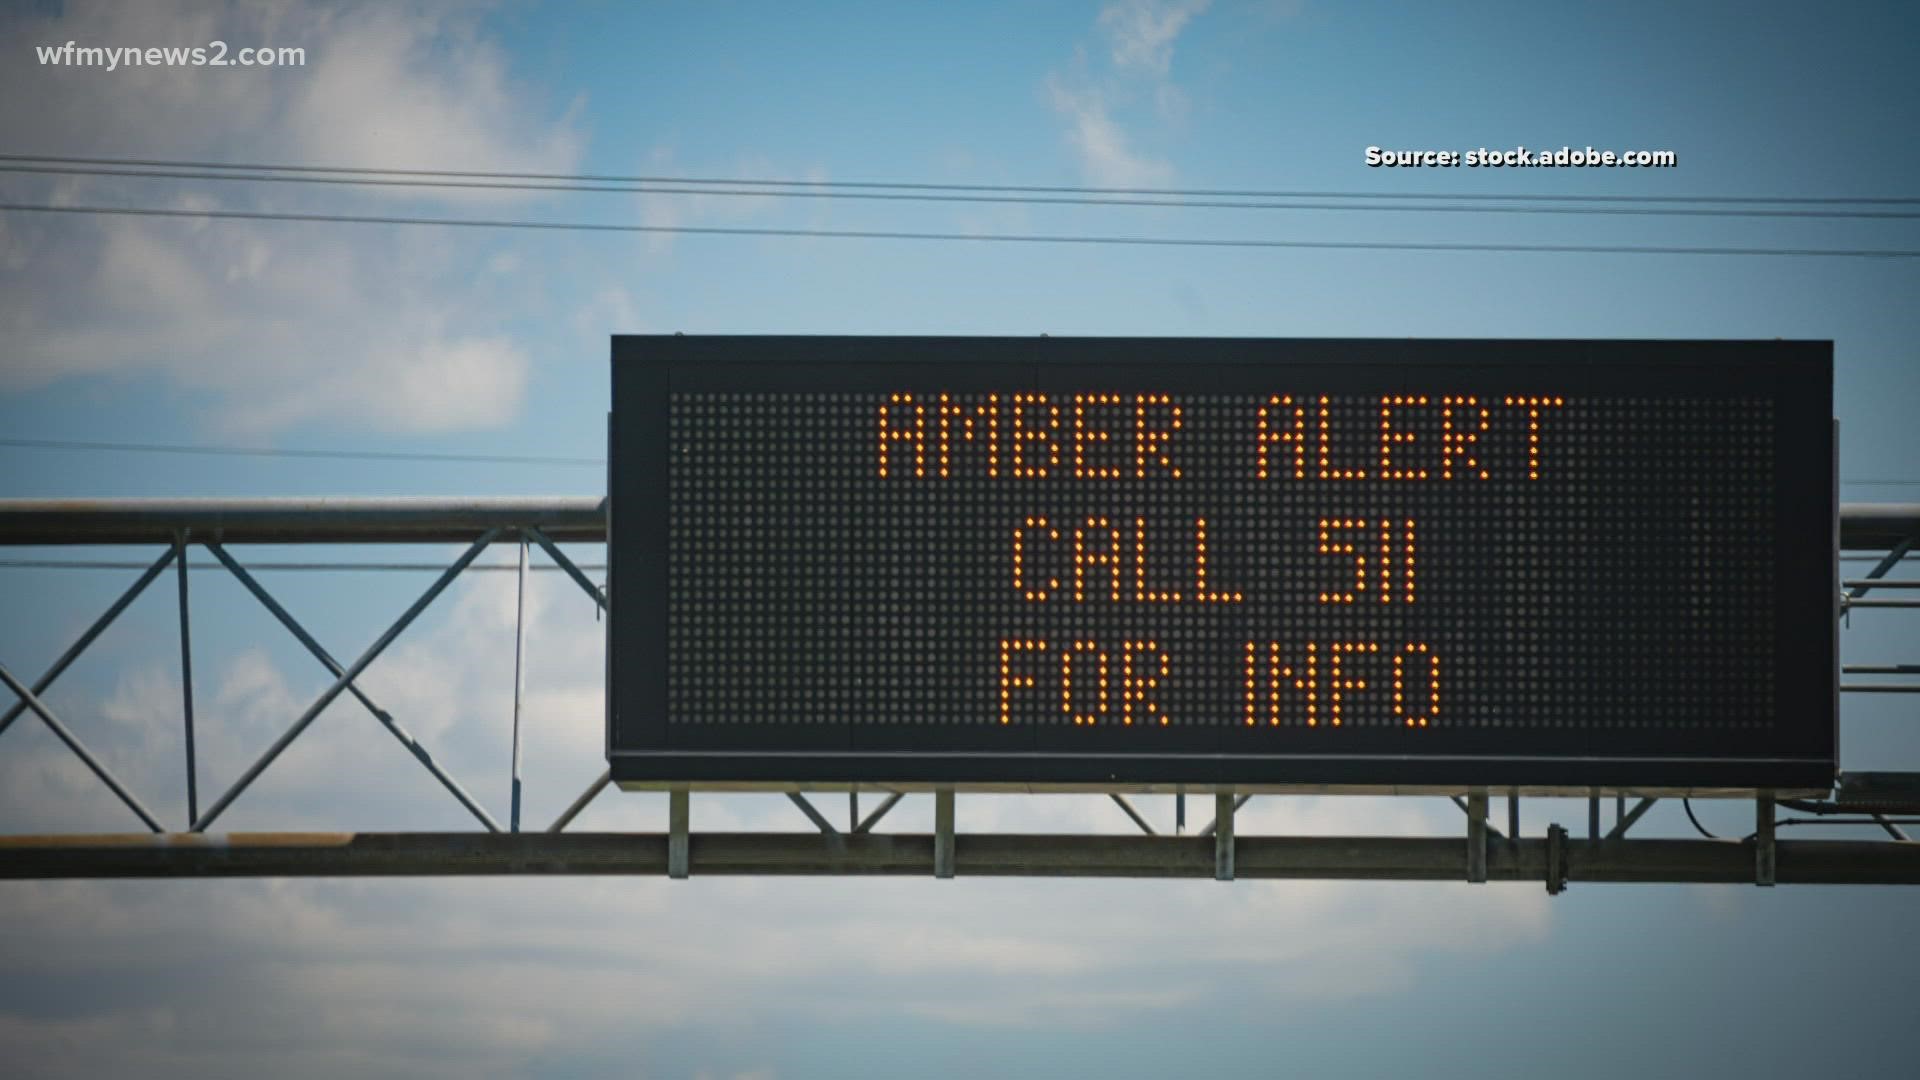 Nona Best, director of the N.C. Center for Missing Persons, explains what classifies an Amber Alert.